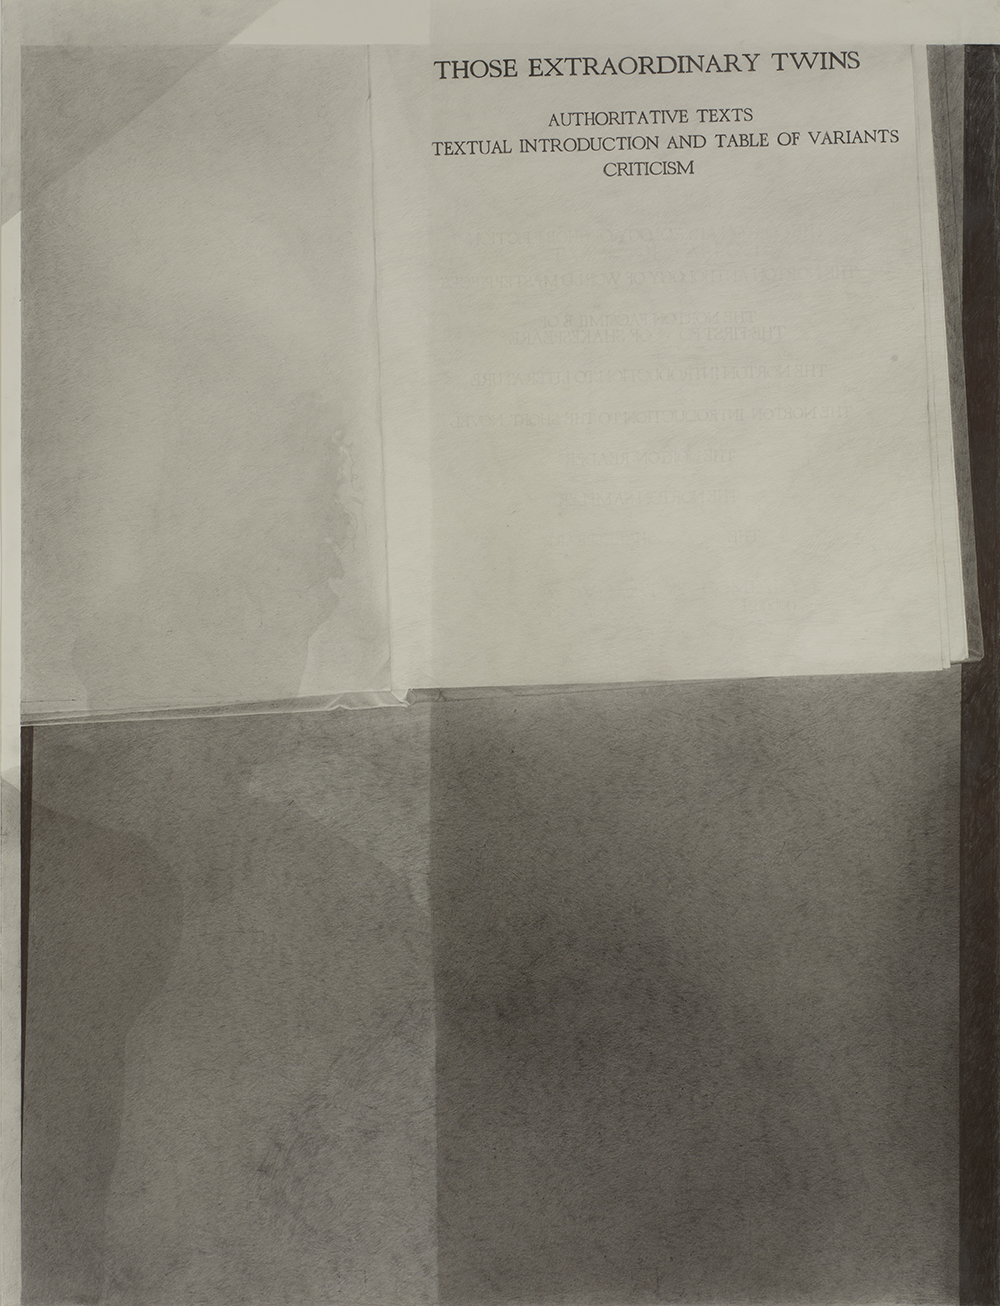 Graphite drawing of a two books, one at the top turned to the title page which reads: “Those Extraordinary Twins: Authoritative Texts / Textual Introduction and Table of Varies / Criticism.” The second book at the bottom turned to two blank pages